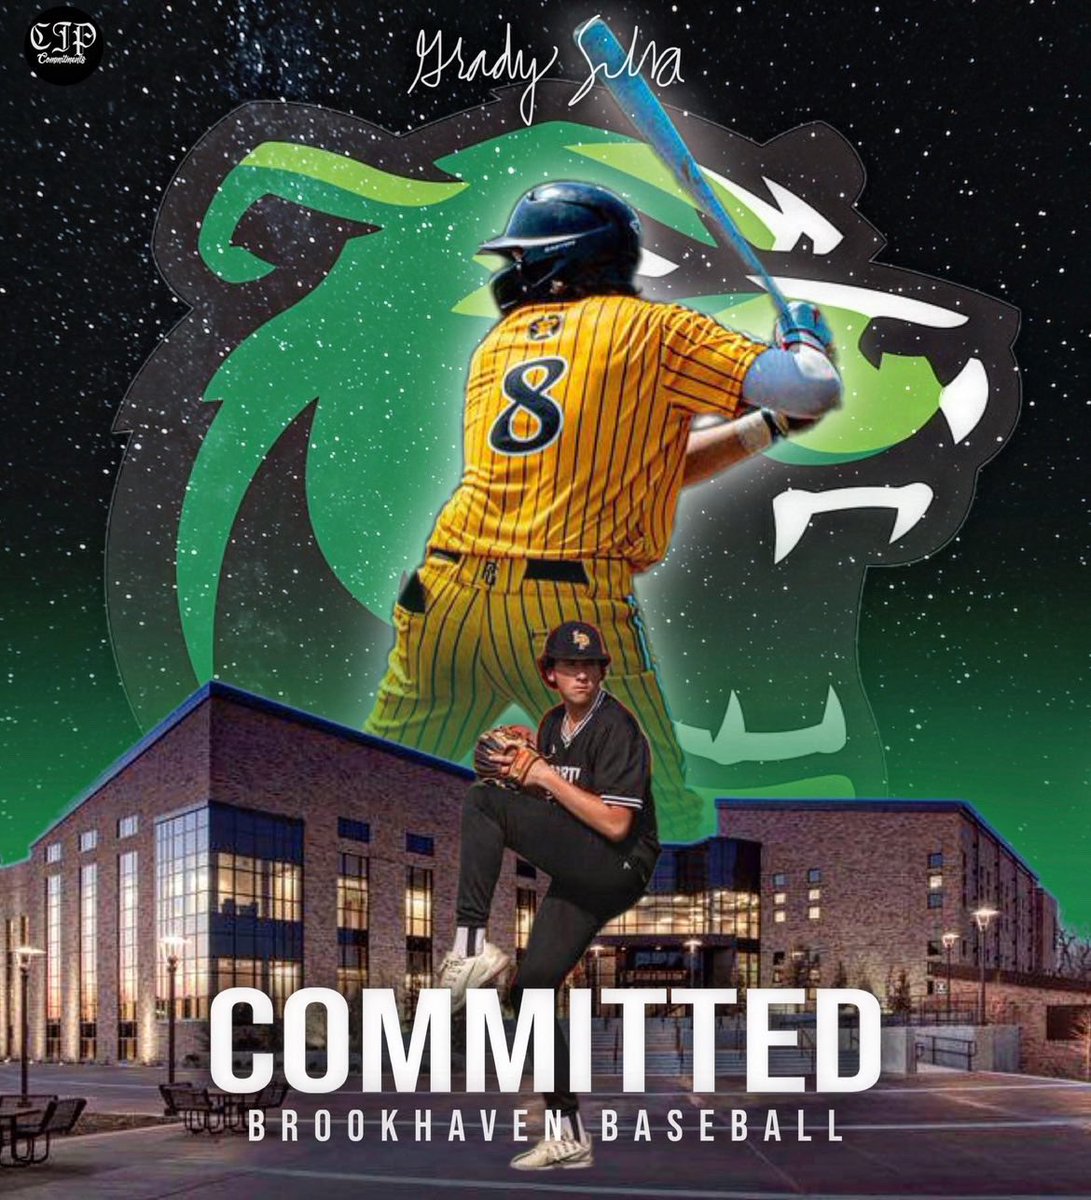 I am blessed and excited to announce that I will be continuing my athletic and academic career at Brookhaven College. First off, I would like to thank God for blessing me with this opportunity,and I would like to thank my family,coaches,and teammates for helping me along the way